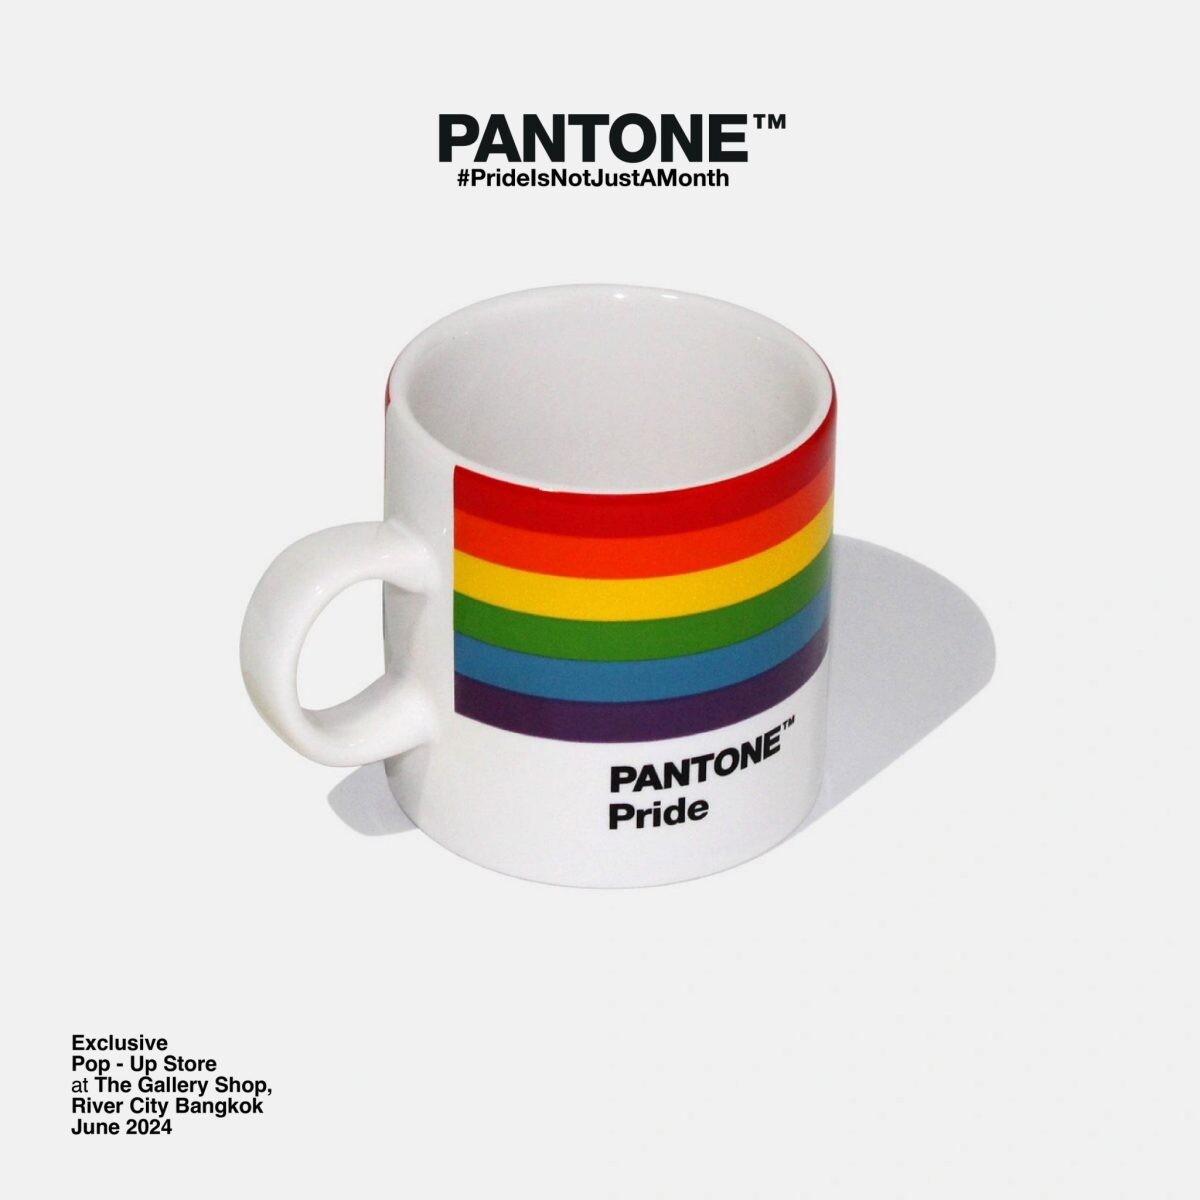 Celebrate Pride Month with PANTONE's vibrant colors and the first-ever photo booth design at The Gallery Shop by River City Bangkok